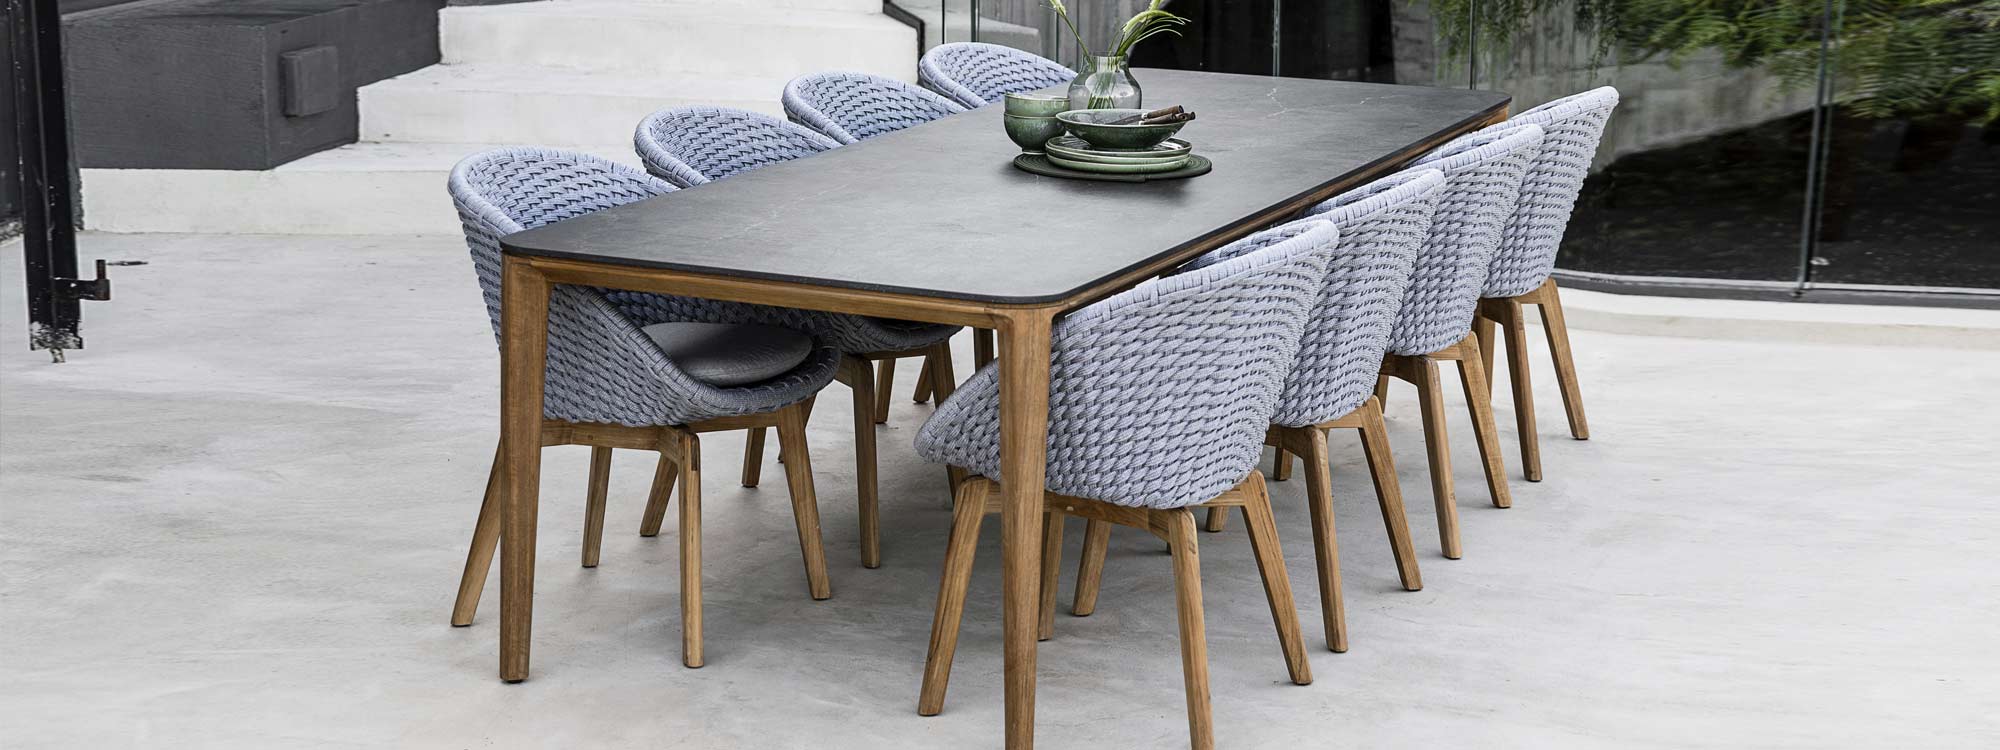 Image of Aspect rectangular teak table with black ceramic top and grey Peacock chairs by Cane-line outdoor furniture company